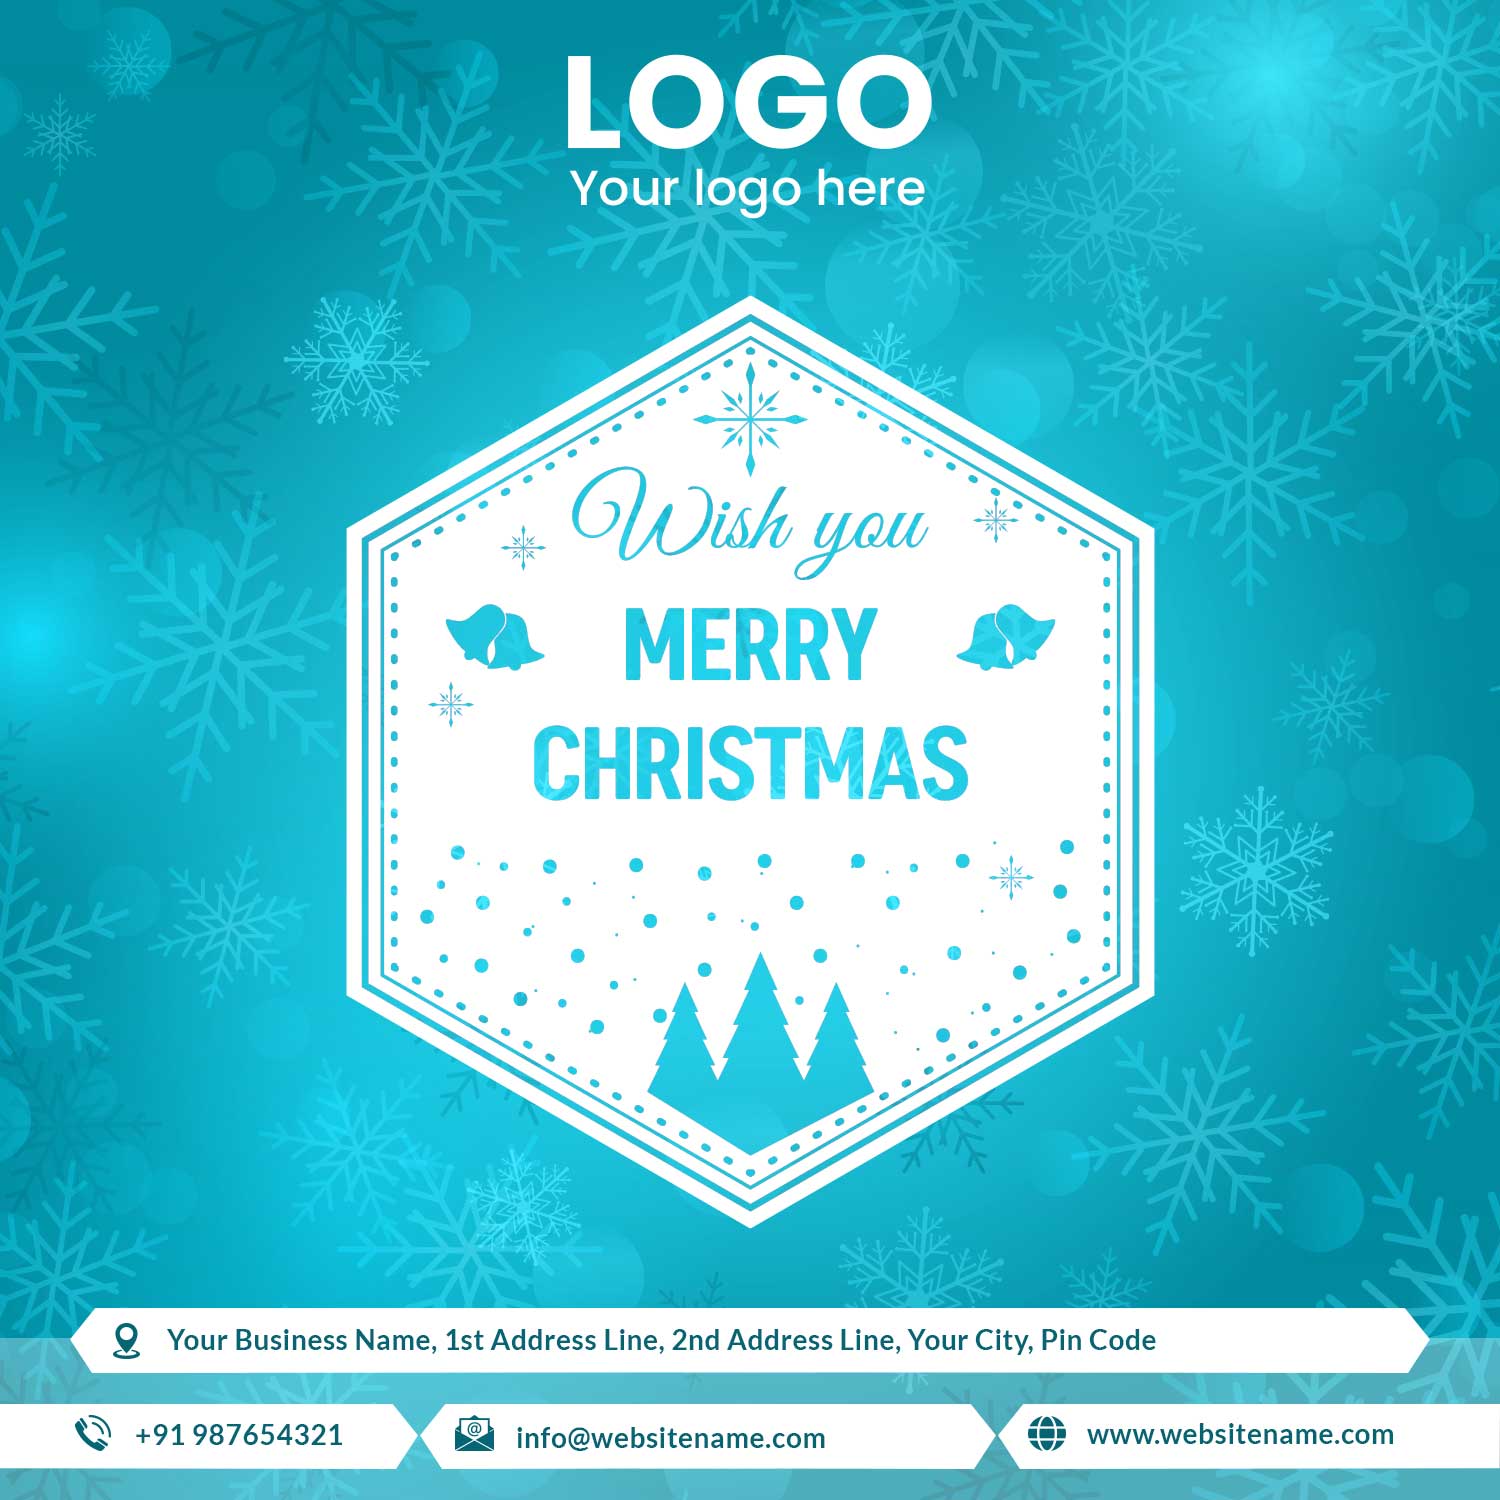 Custom Company Logo Cards for Business Christmas Wishes